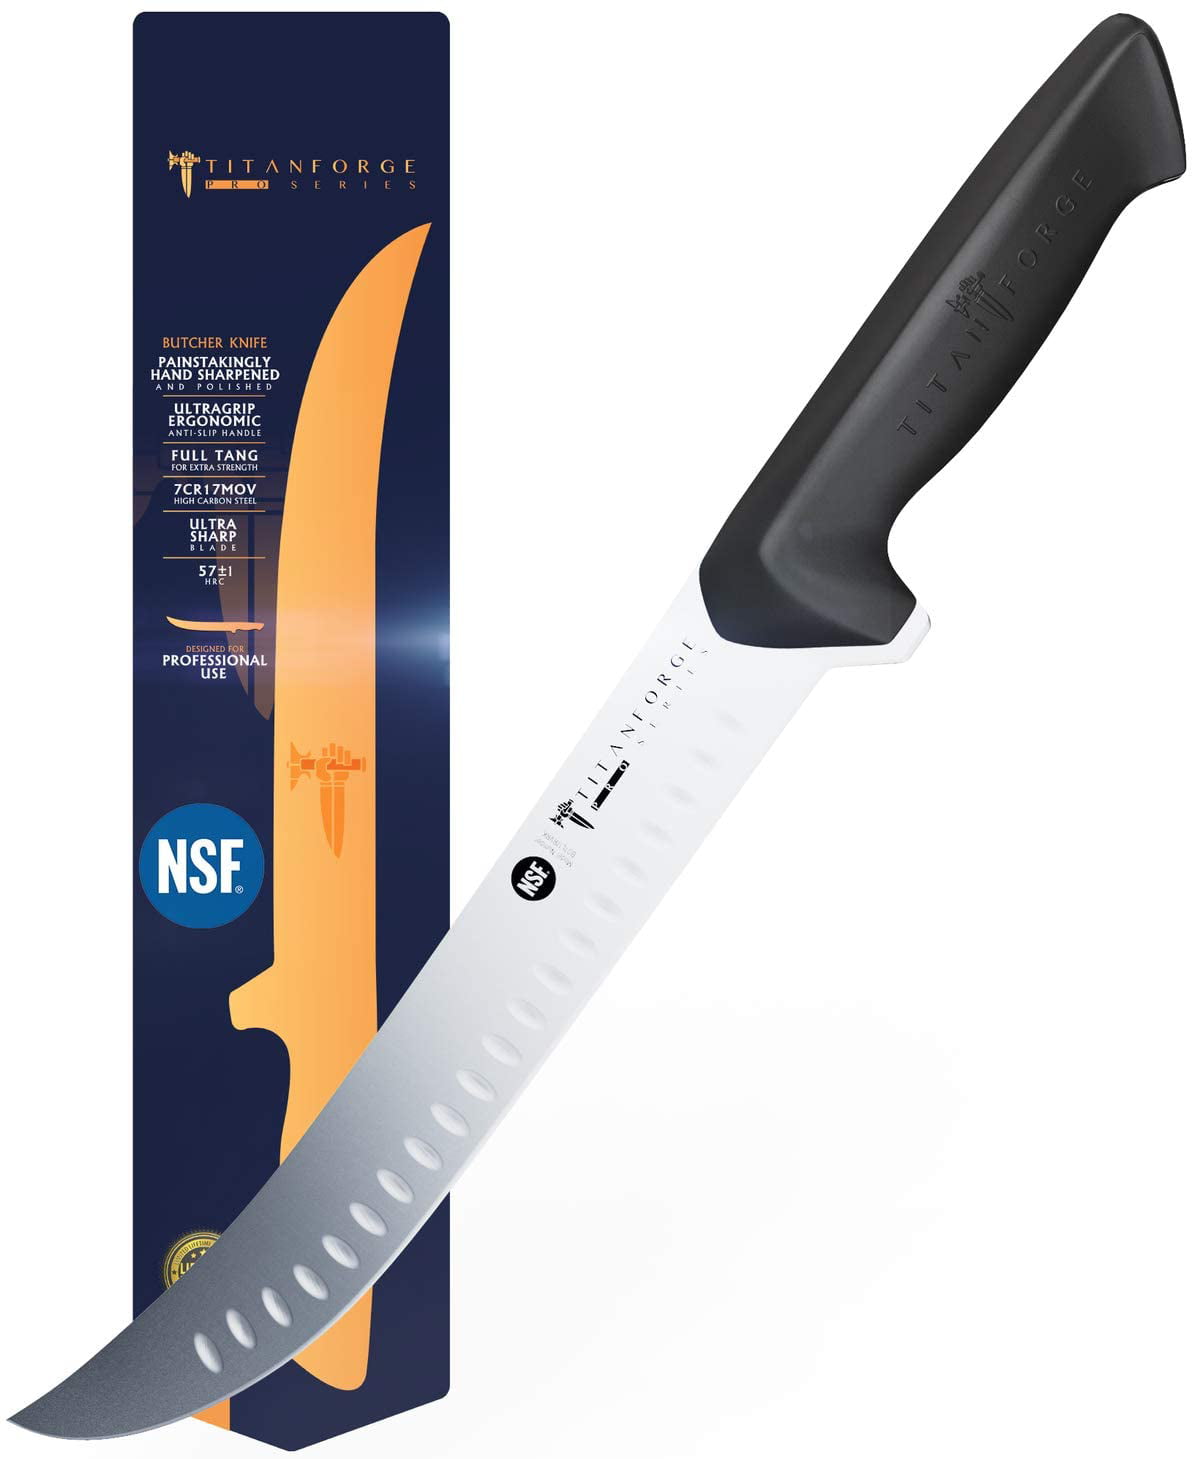 Dalstrong TITAN FORGE - Santoku Knife 7 - Pro Series Knives - 7CR17MOV  High-Carbon steel - Full Tang - NSF Certified